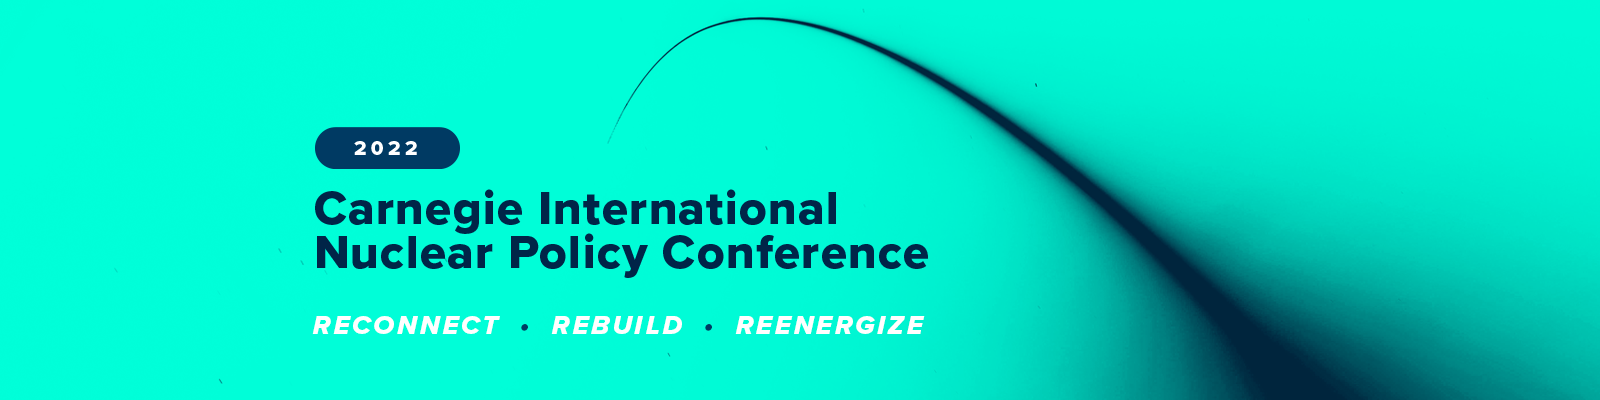 2022 Carnegie International Nuclear Policy Conference